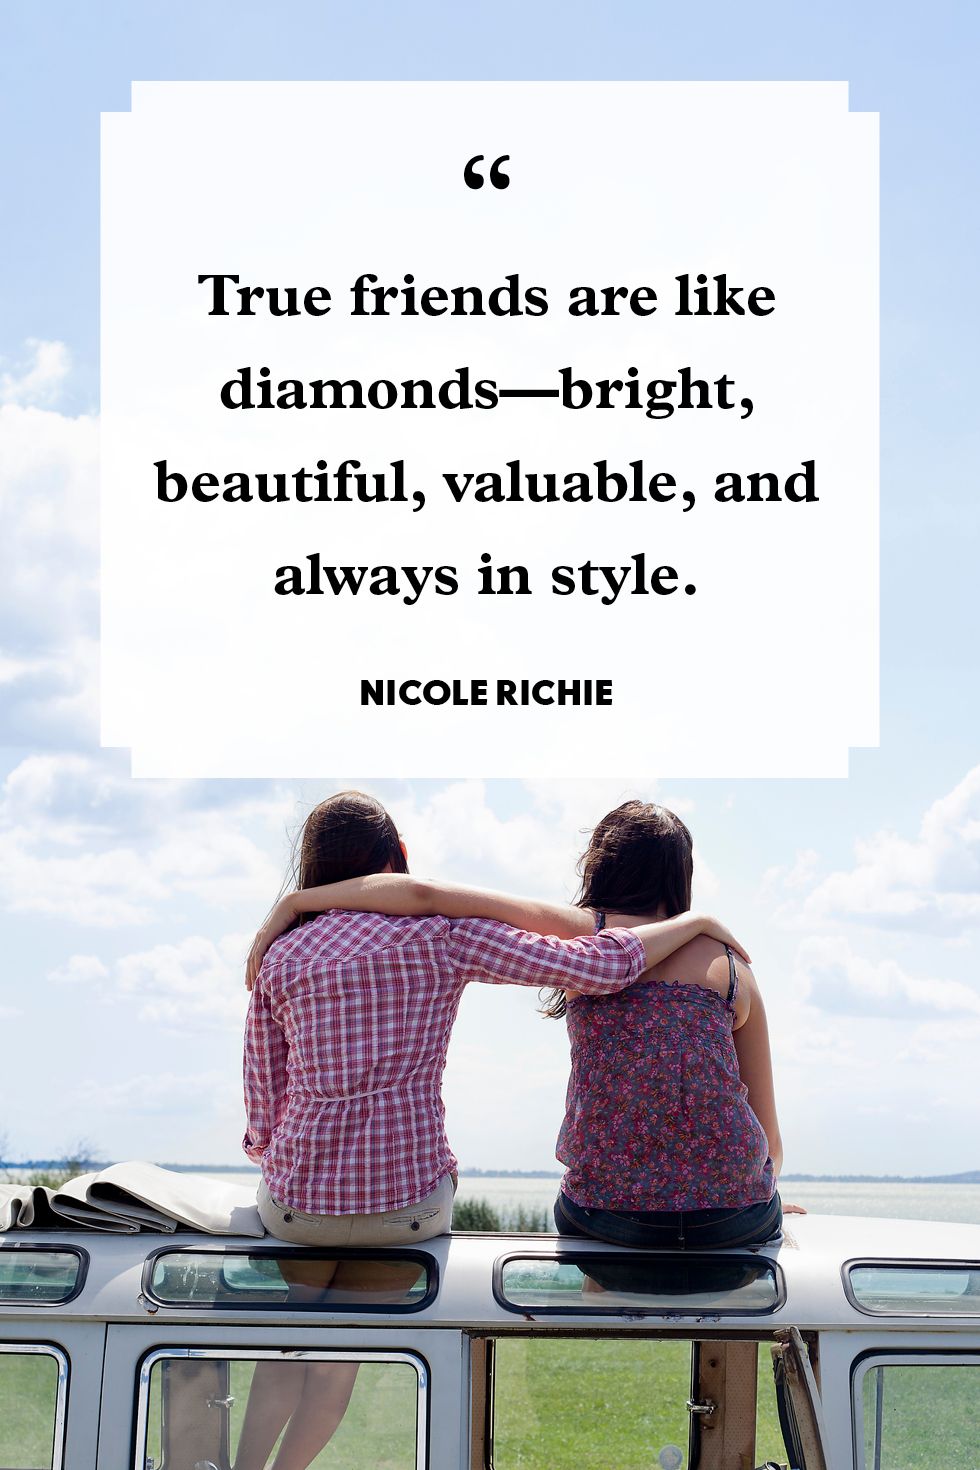 “Remarkable Collection of Full 4K Friendship Quote Images: Over 999 Inspirational Quotes on Friendship”